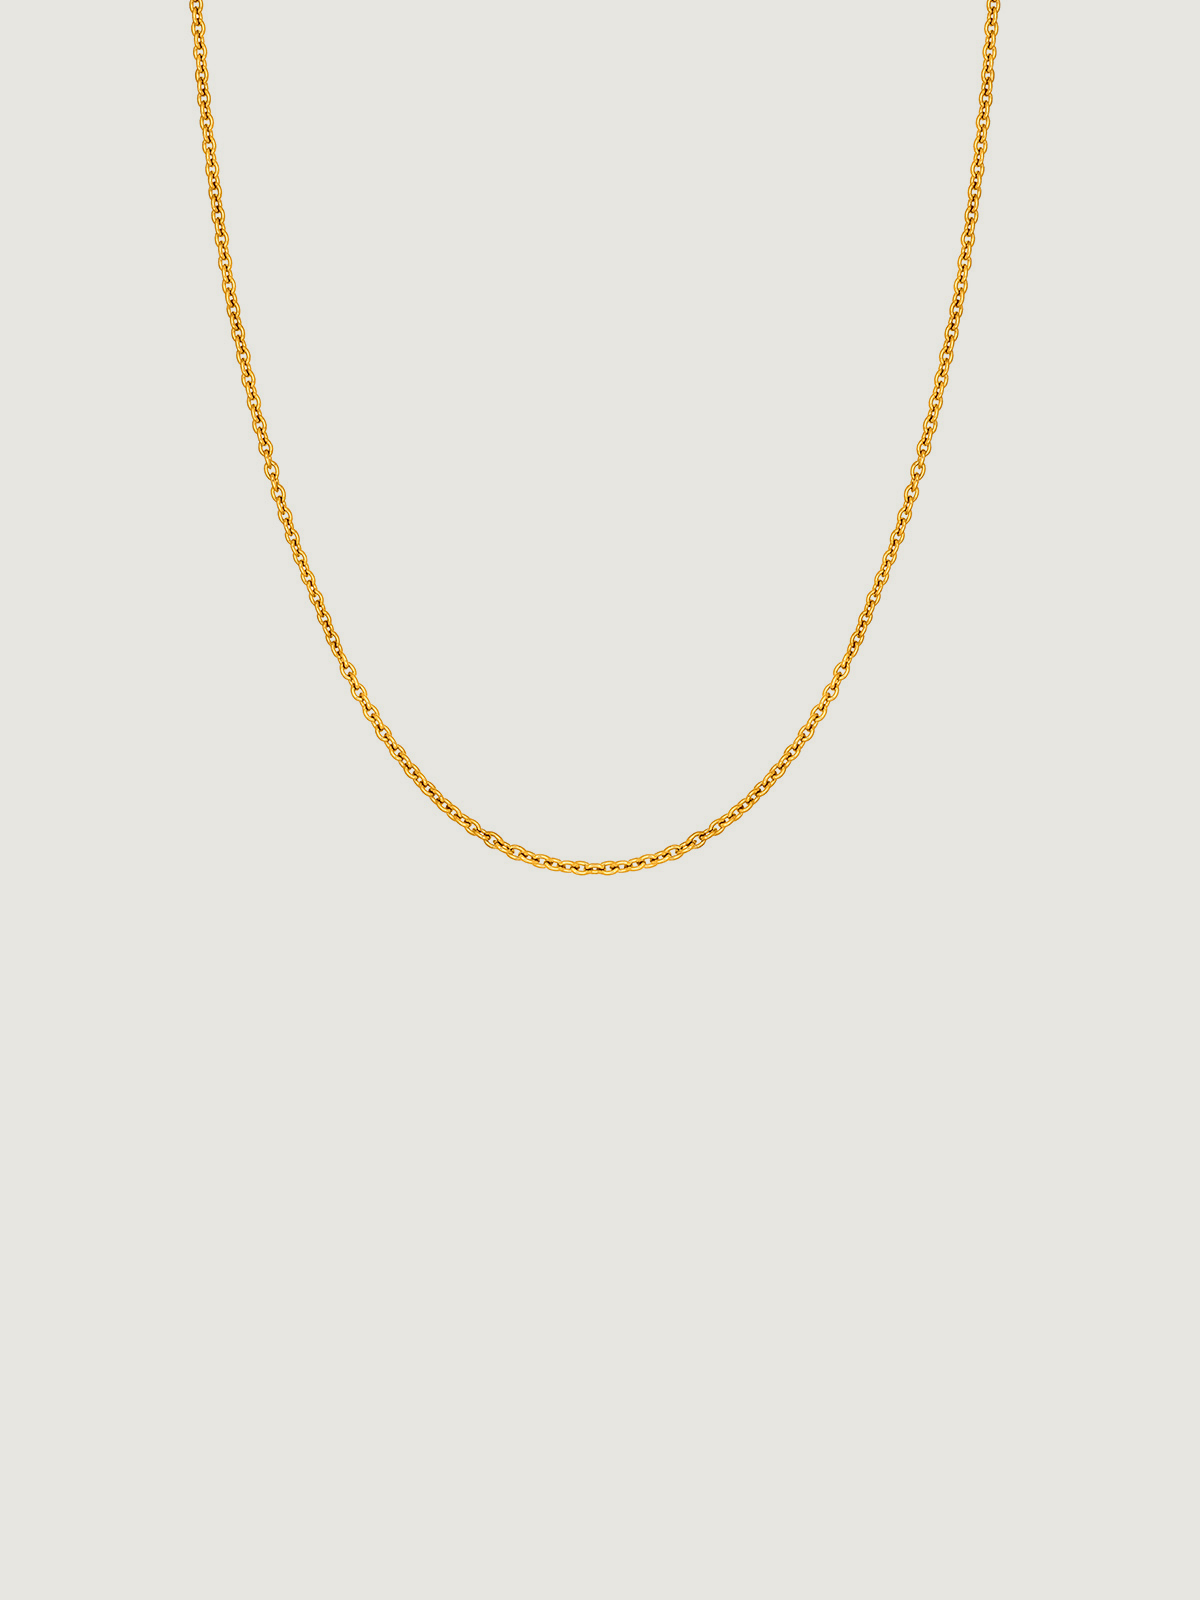 Long 925 silver chain dipped in 18K yellow gold